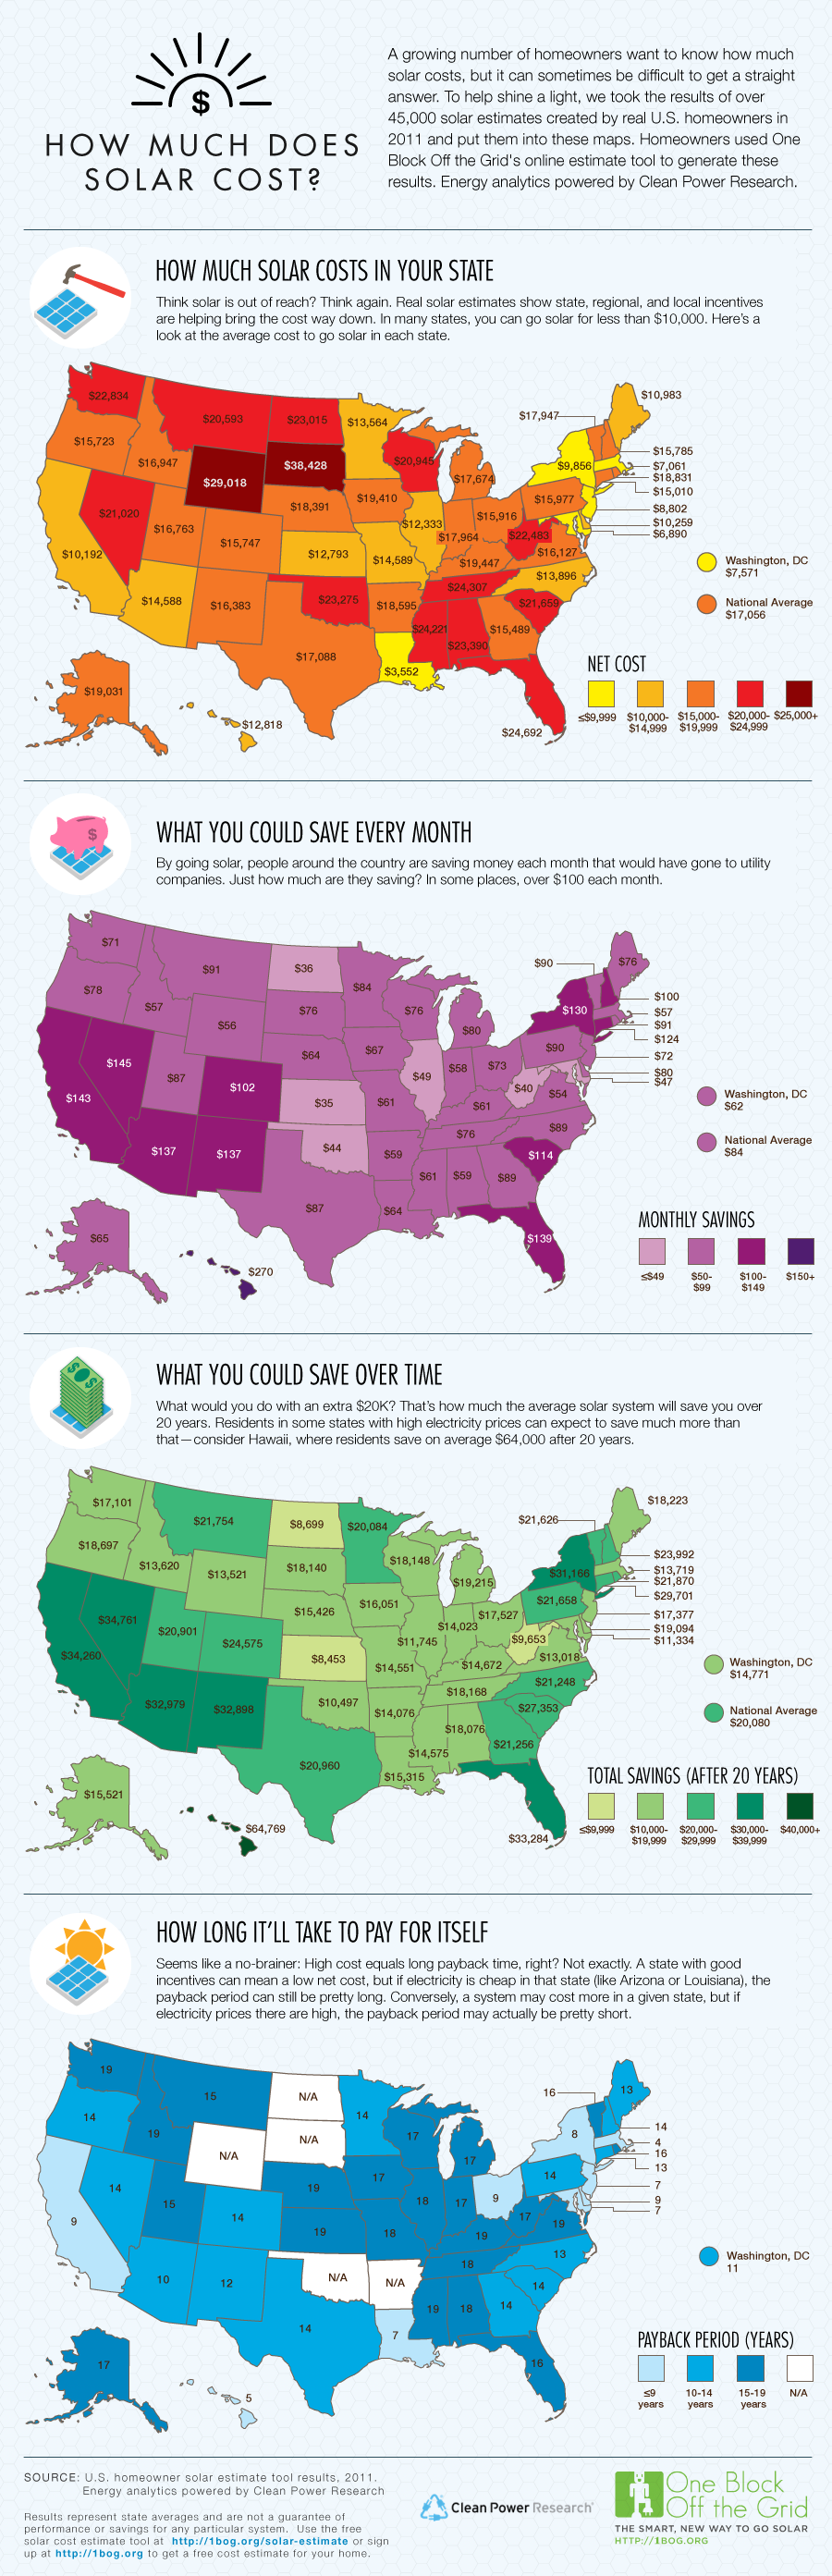 How Much Does Solar Power Cost How Much Does Solar Power Cost? (Infographic)